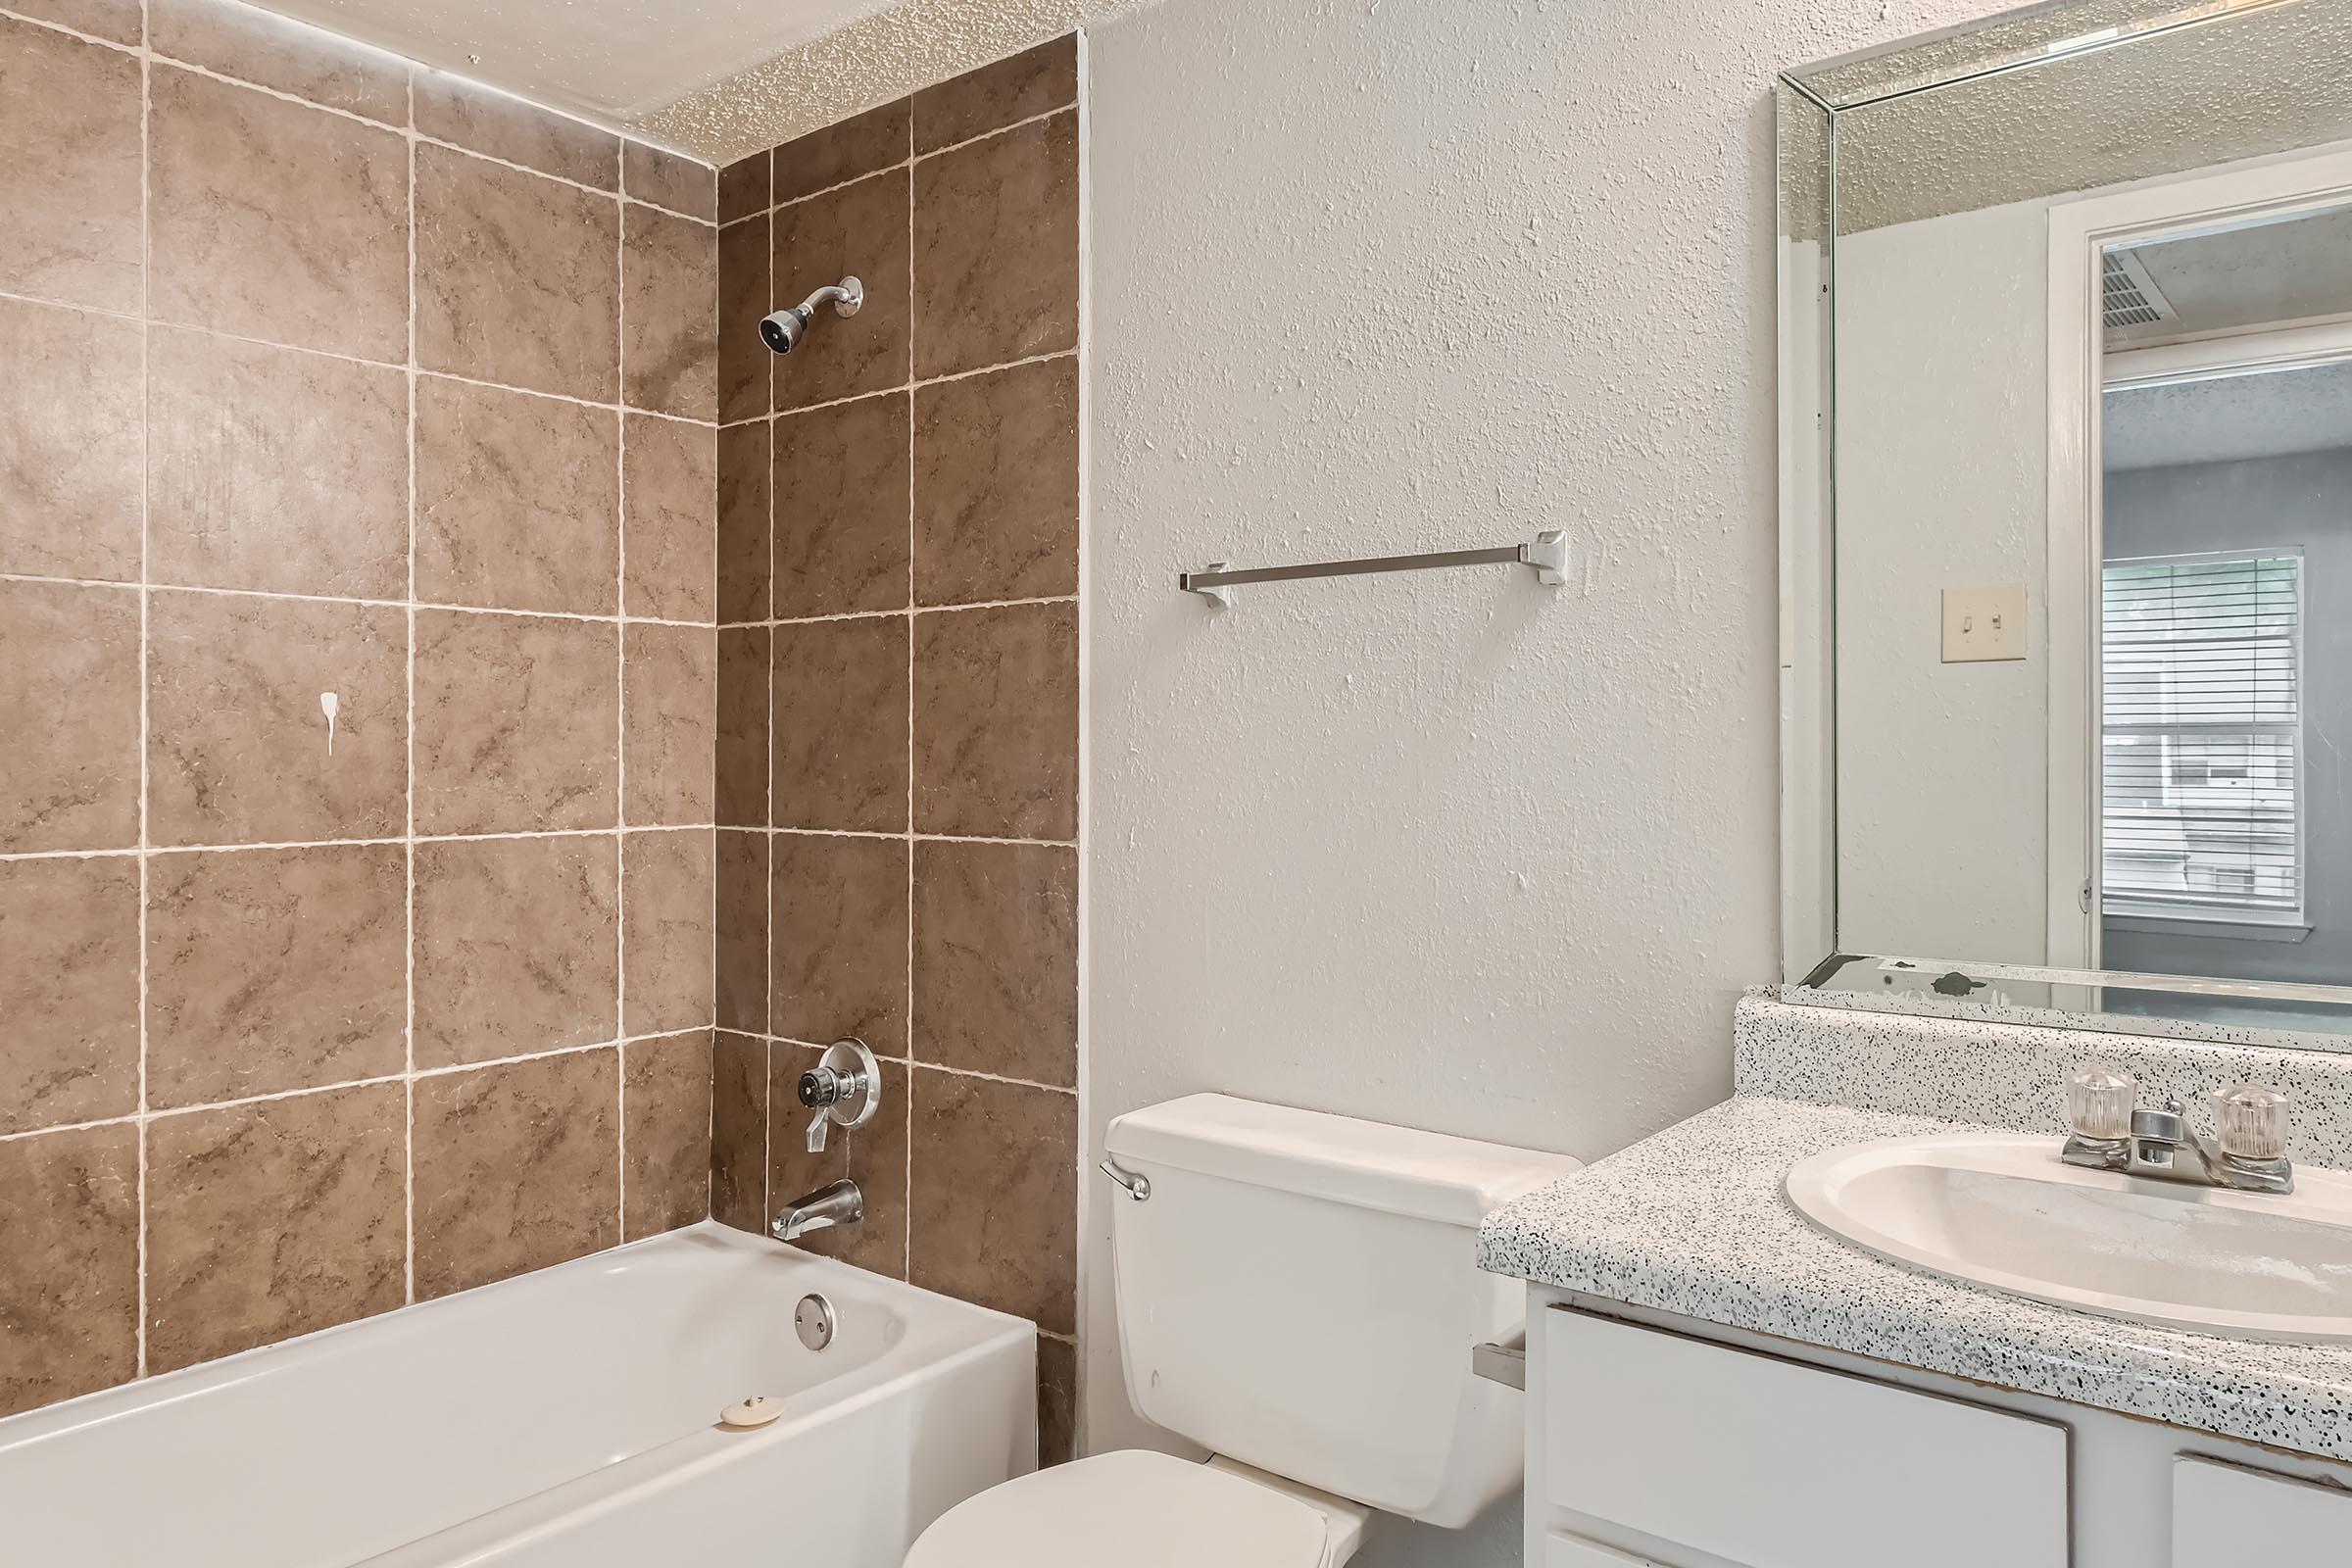 An apartment bathroom with brown tiling in the tub area at Rise North Arlington.